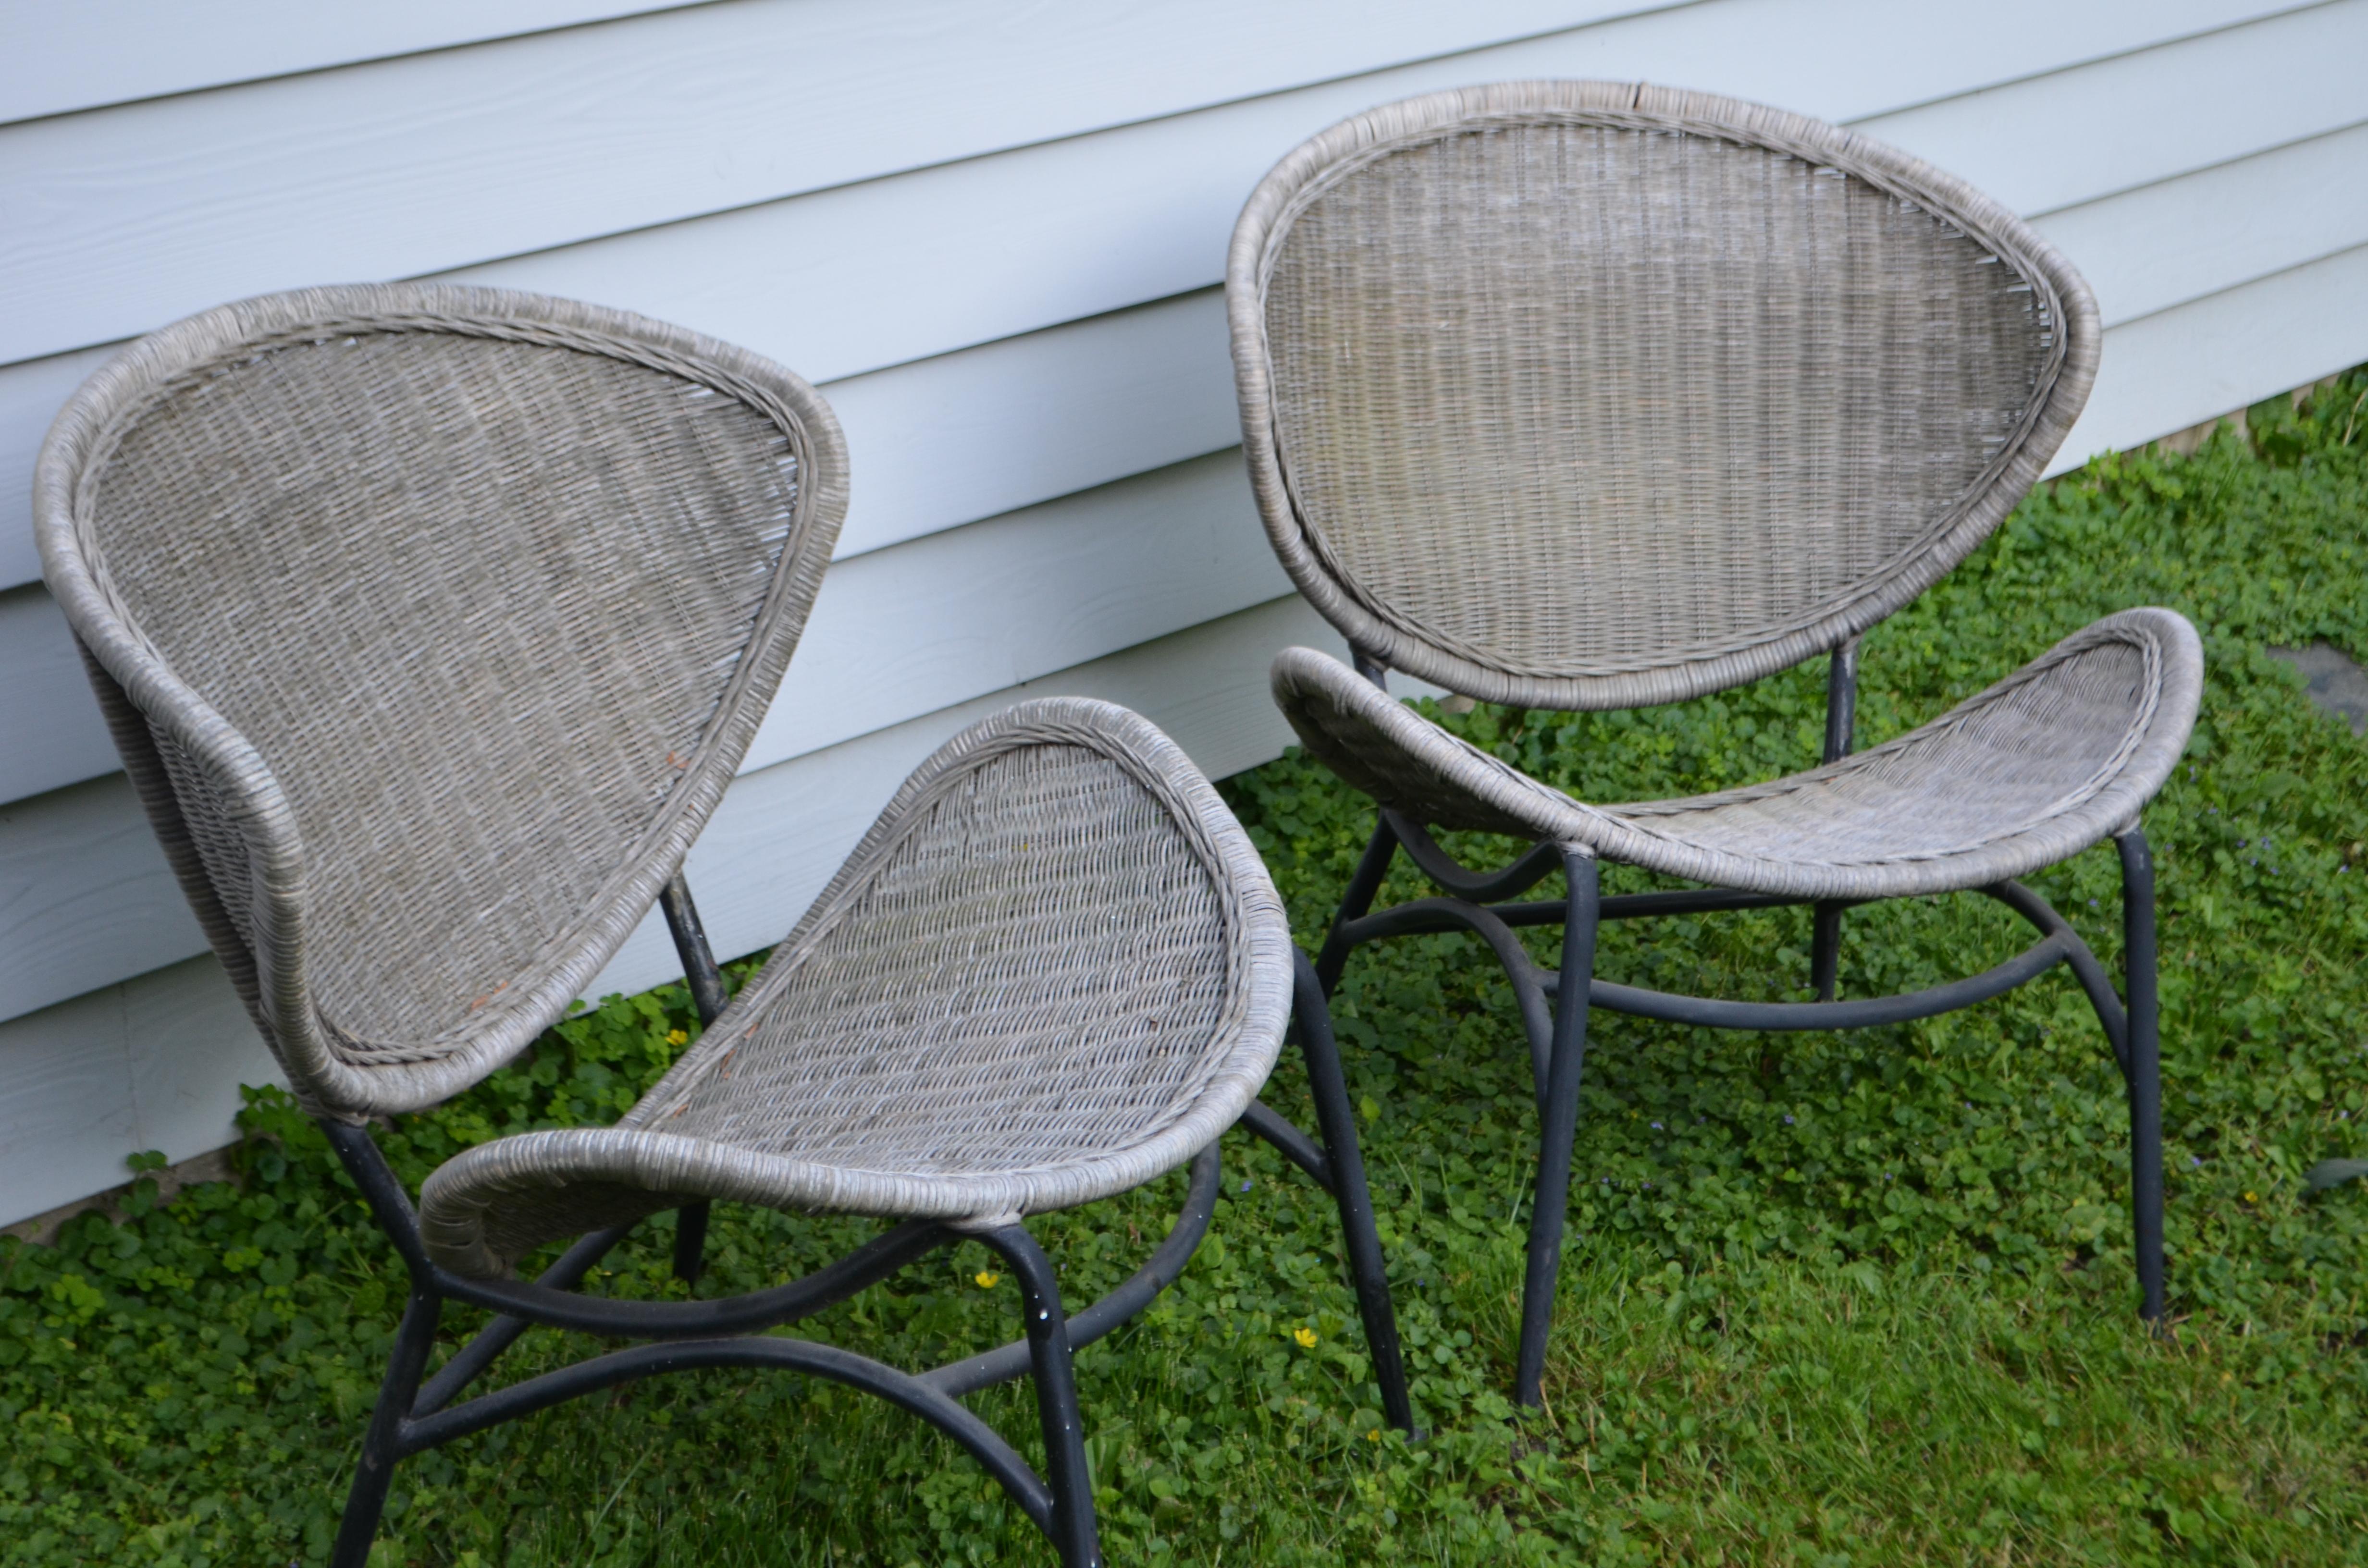 Salterini Wicker Clamshell Chairs, Pair, with Steel Frame for Home, Patio, Porch 2